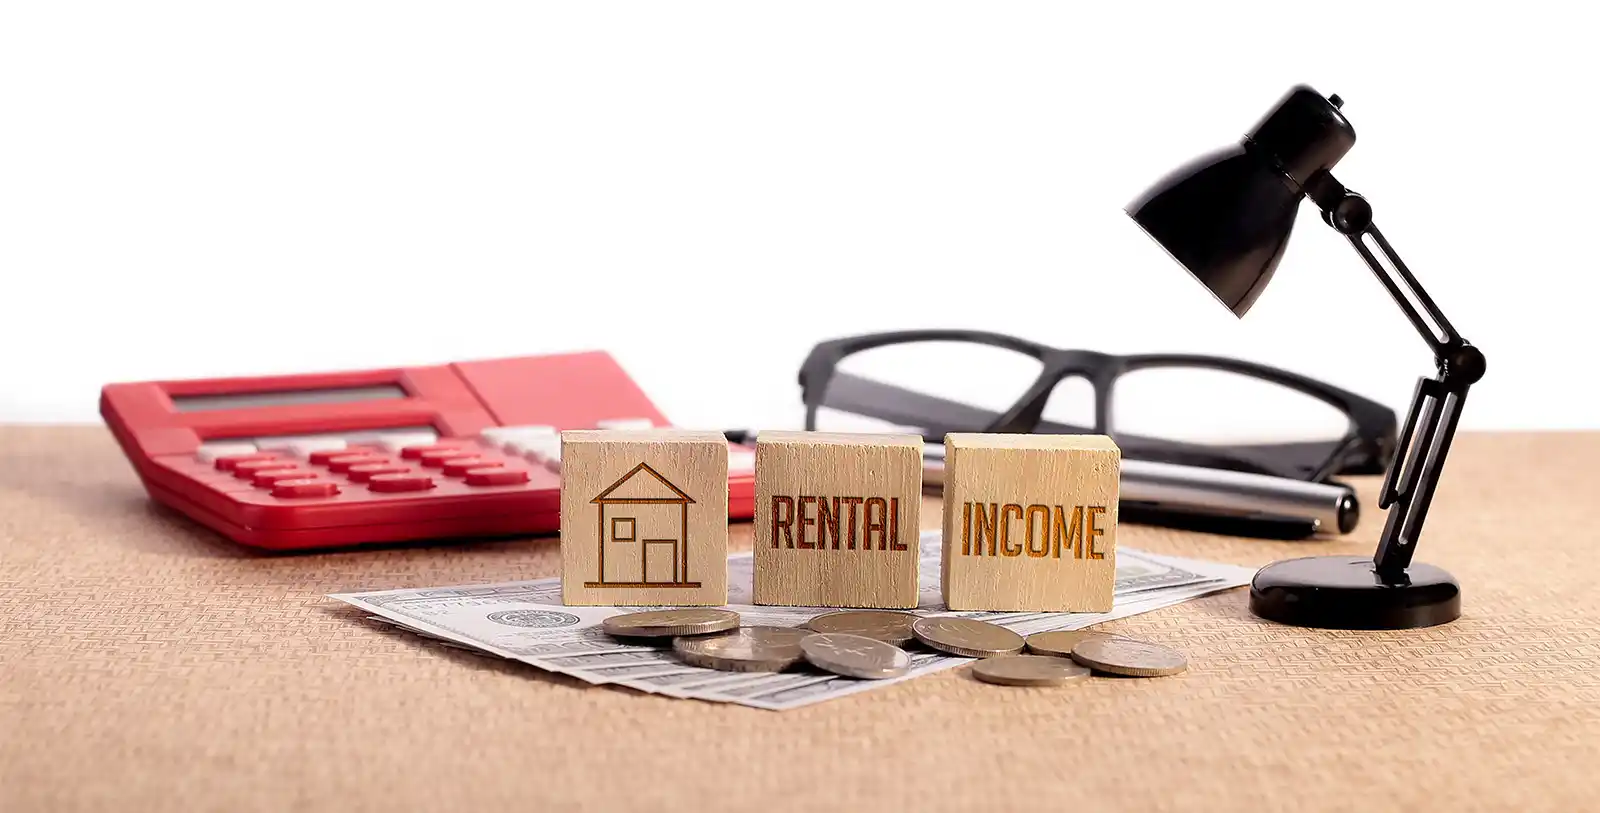 rental income is a healthy flow of cash during inflation